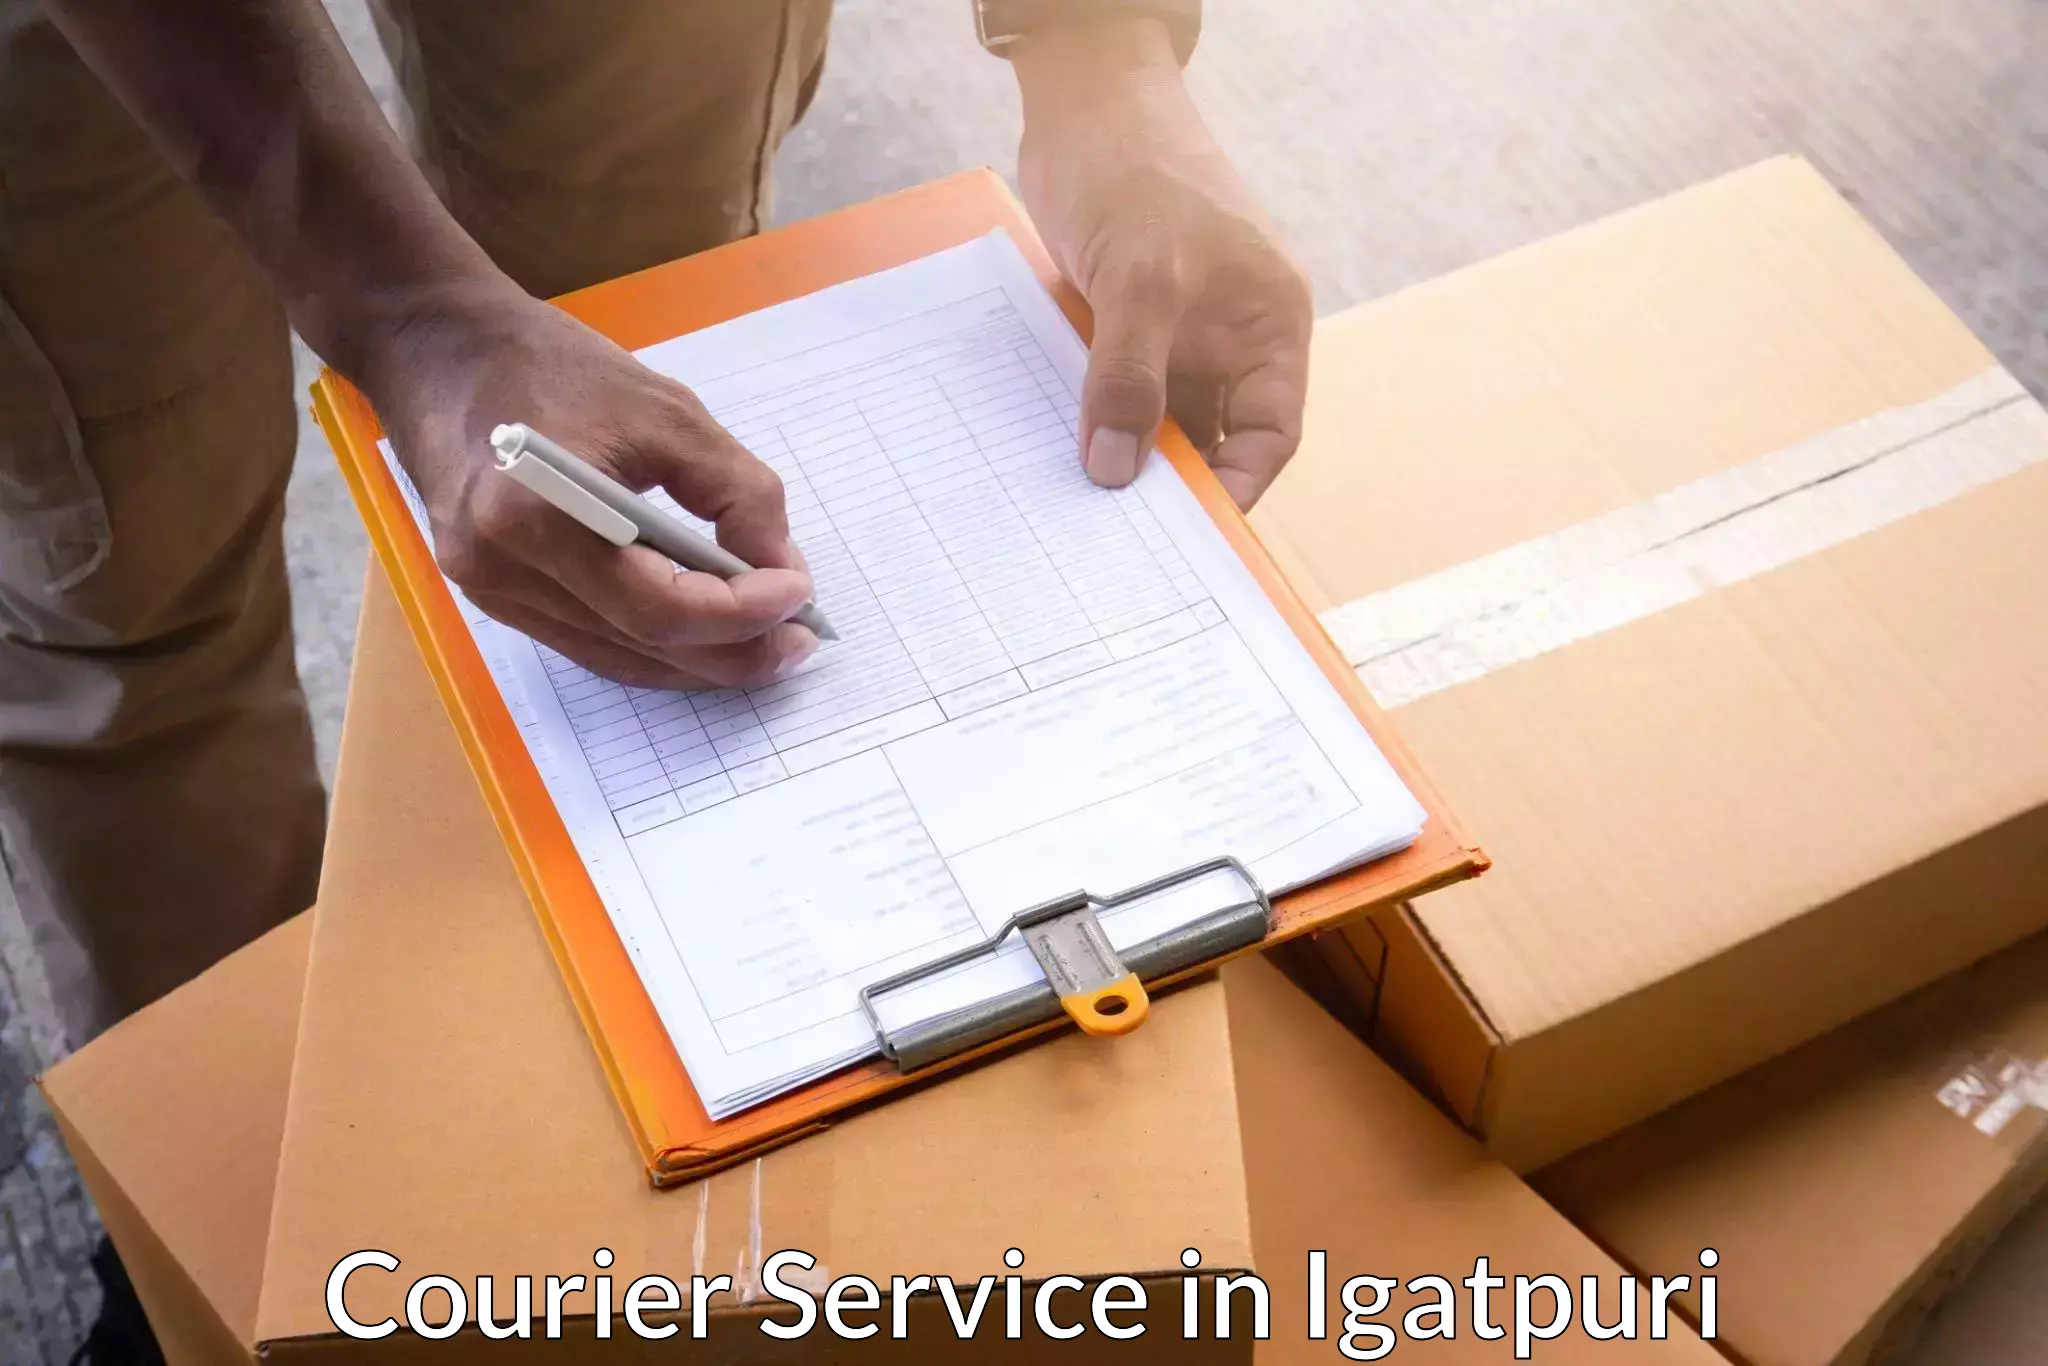 Business delivery service in Igatpuri